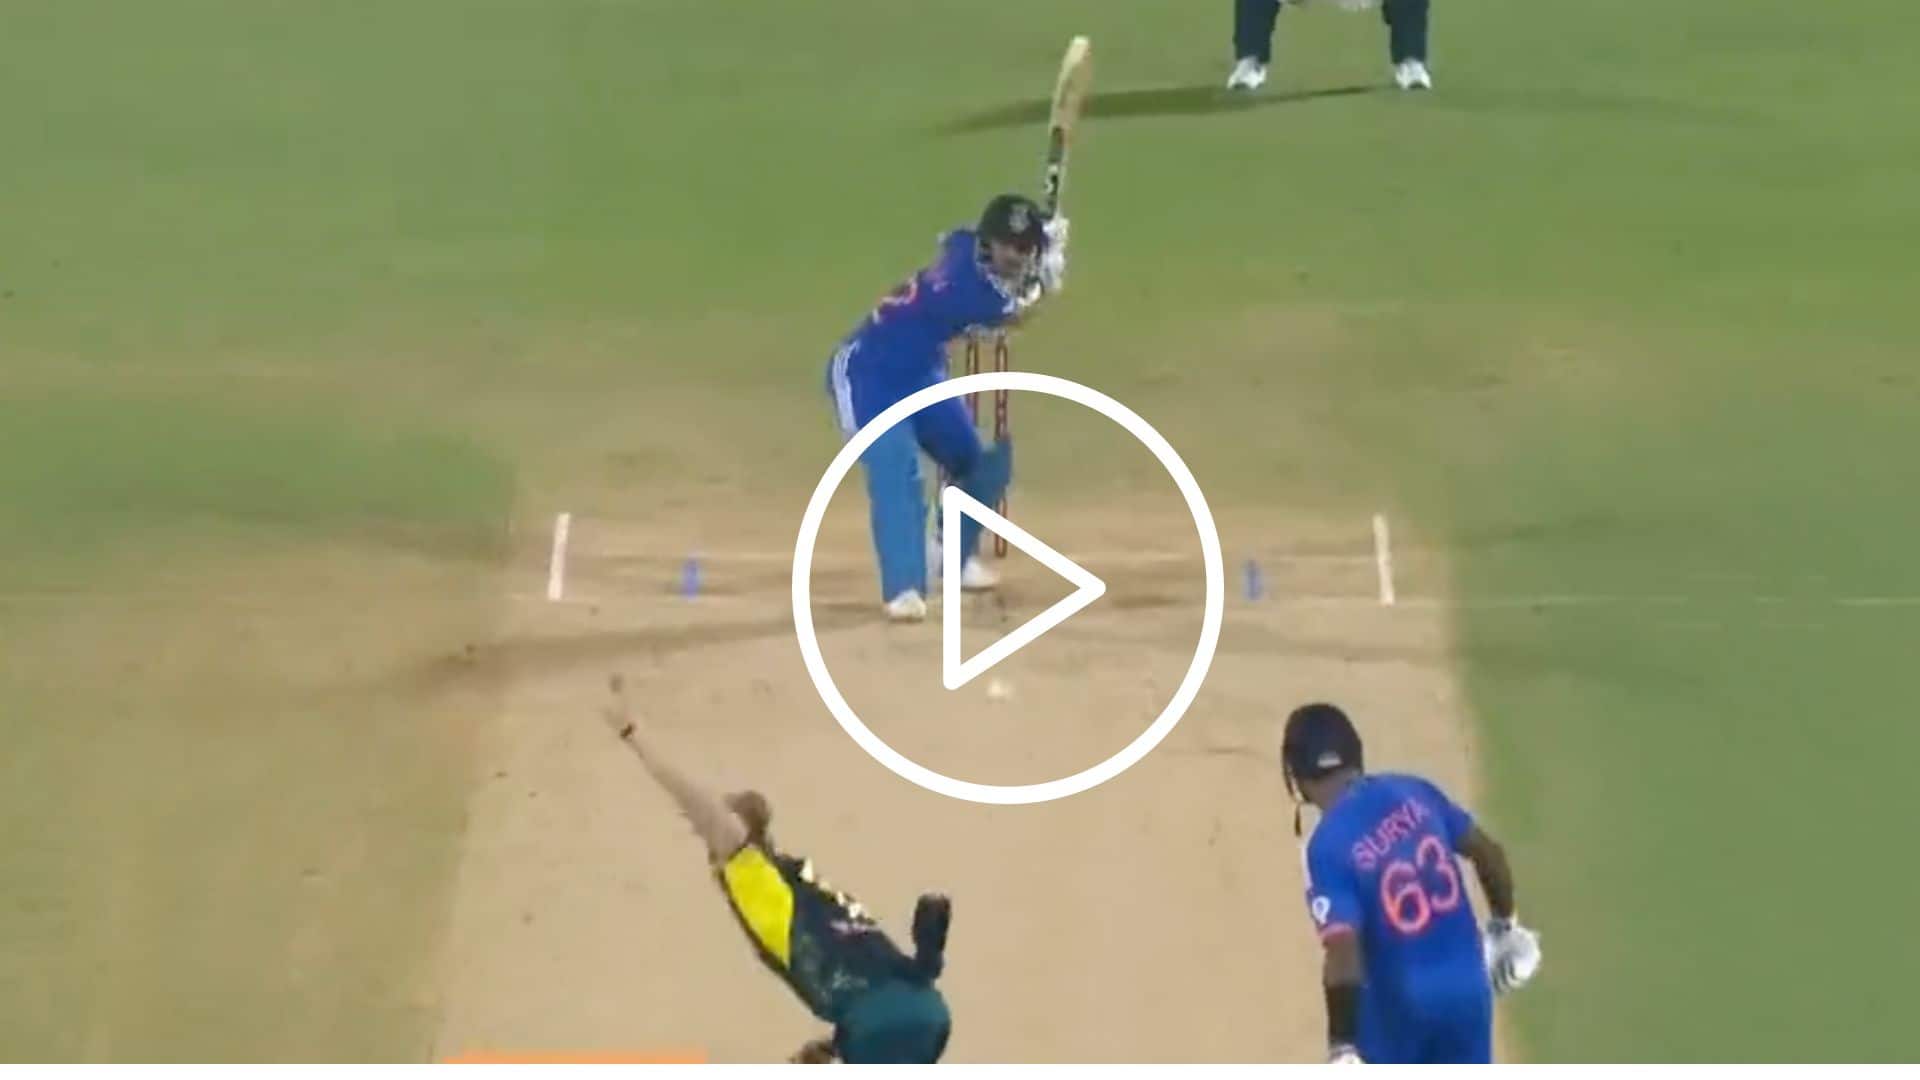 [Watch] Ishan Kishan Hits A 'Monstrous' Six Against AUS In the First T20I At Vizag